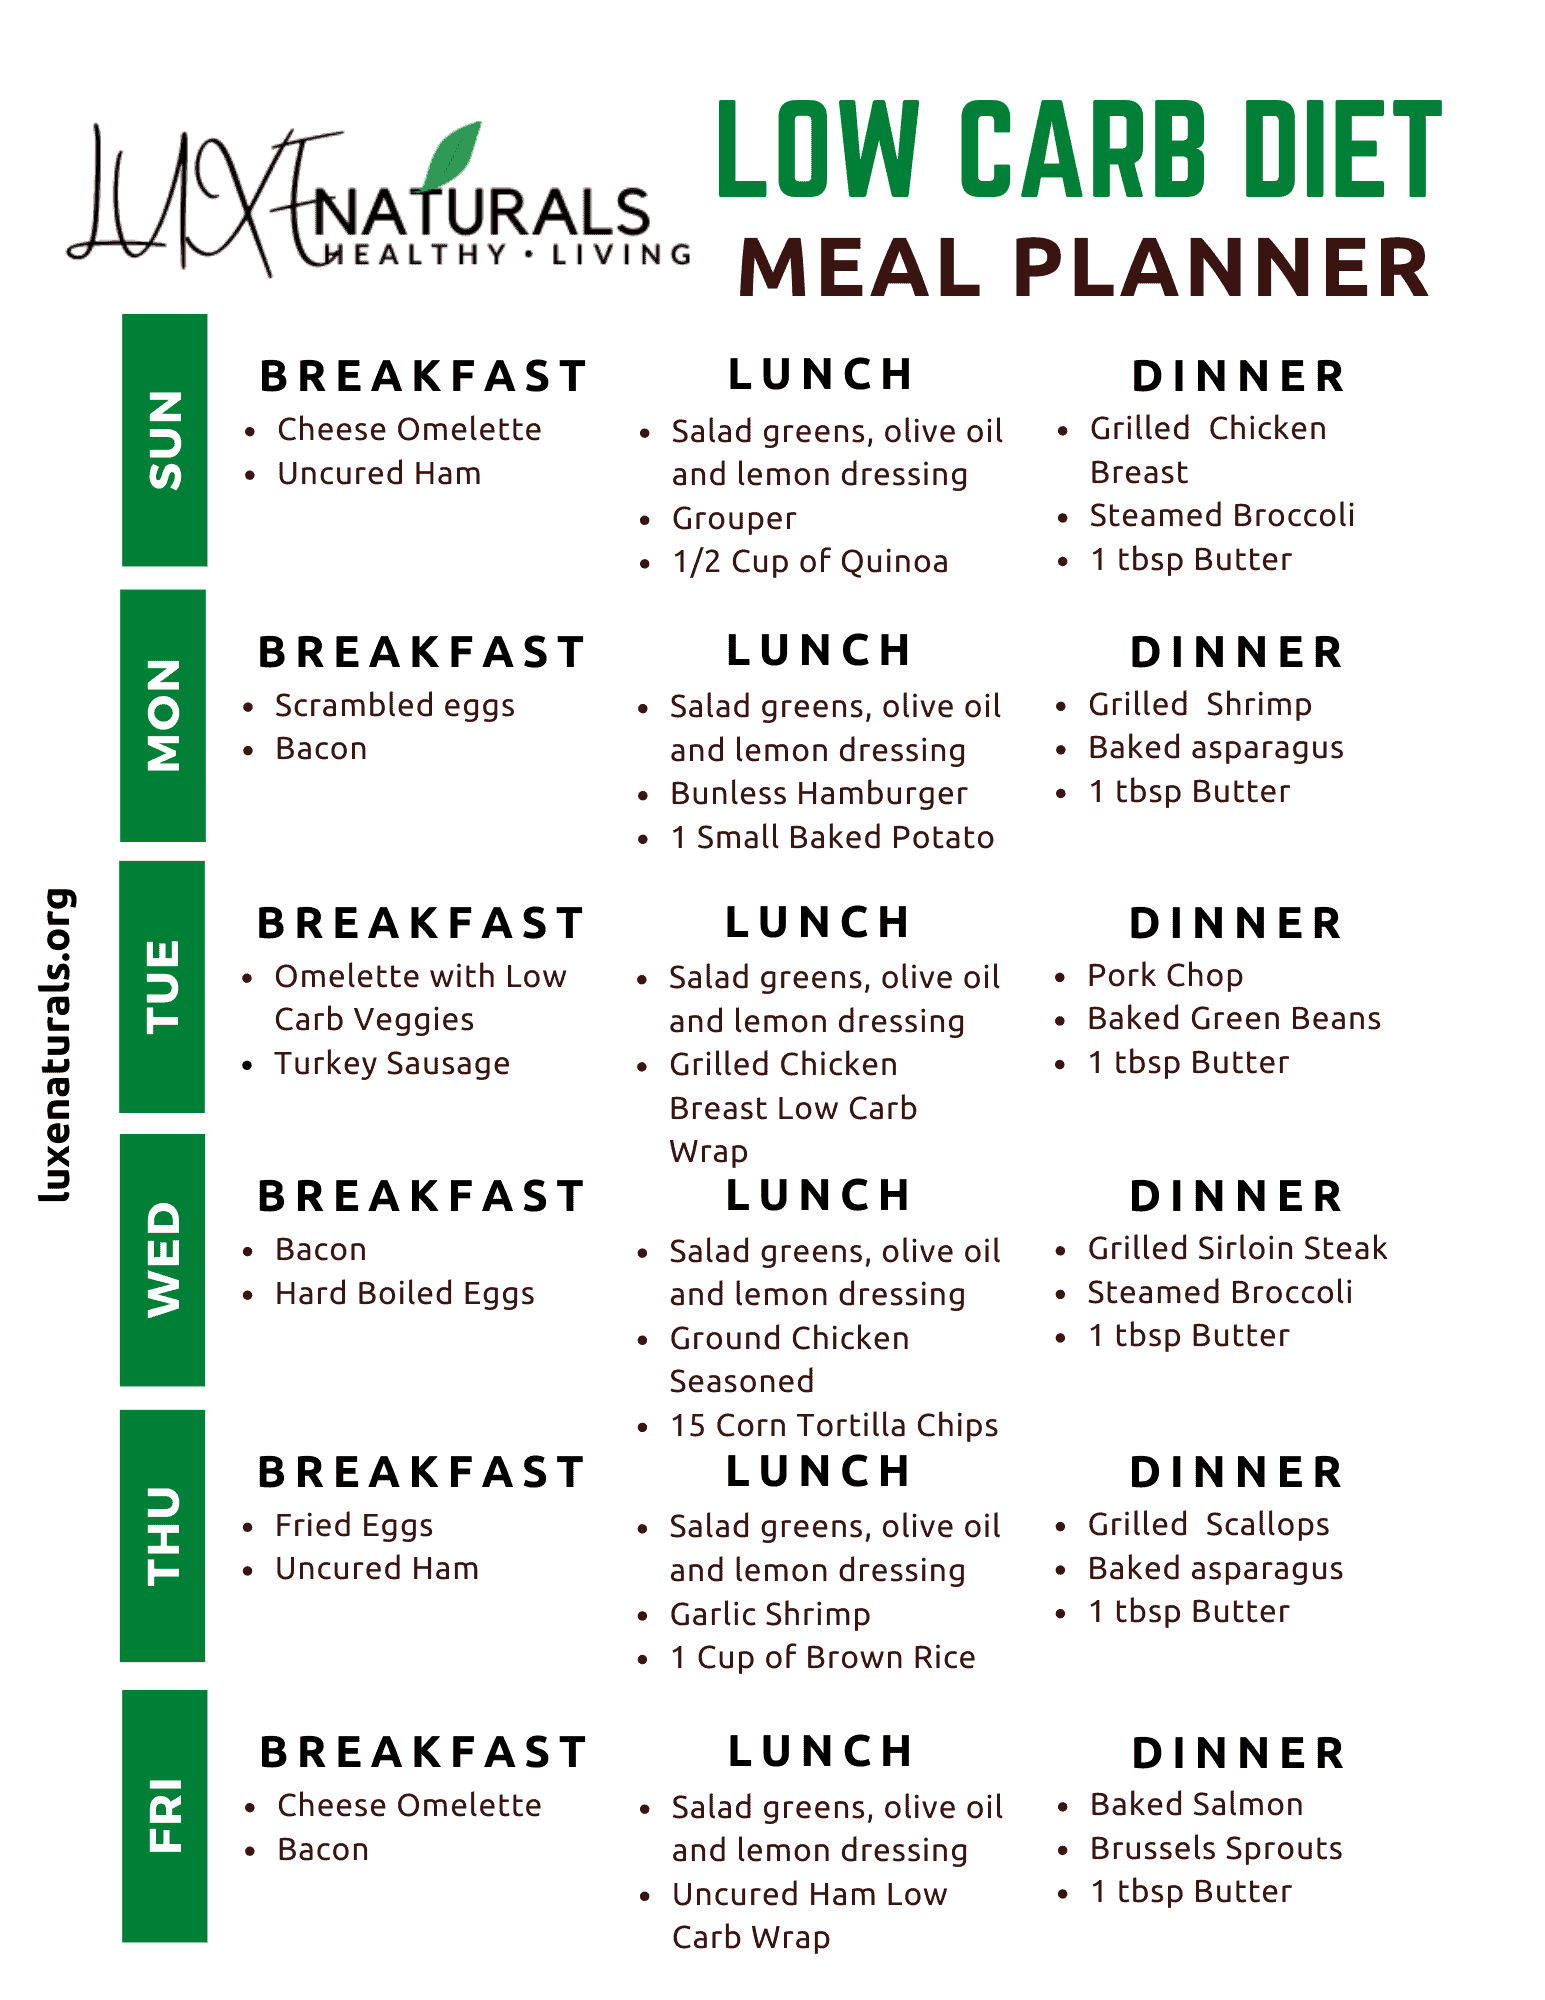 LUXE-Naturals-LOW-CARB-PLANNER-1